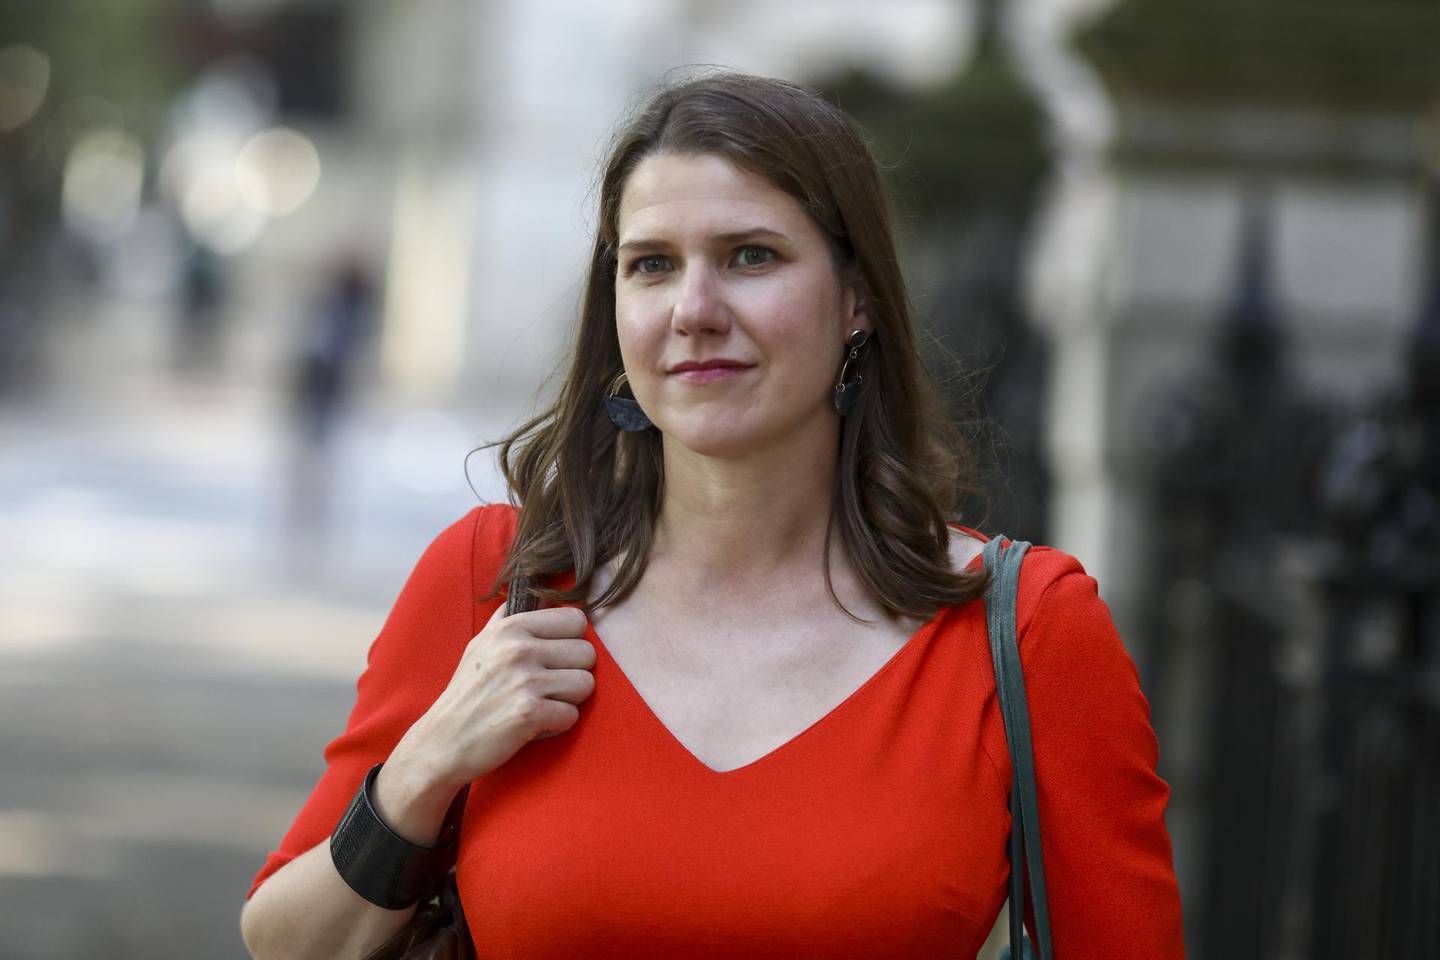 Jo Swinson, leader of the Liberal Democrats, leaves Millbank Studios after giving a media interview in London, U.K., on Tuesday, Aug. 27, 2019. Swinson told BBC Radio 4 her preference is for legislation to mandate the government to seek a Brexit extension. Photographer: Simon Dawson/Bloomberg